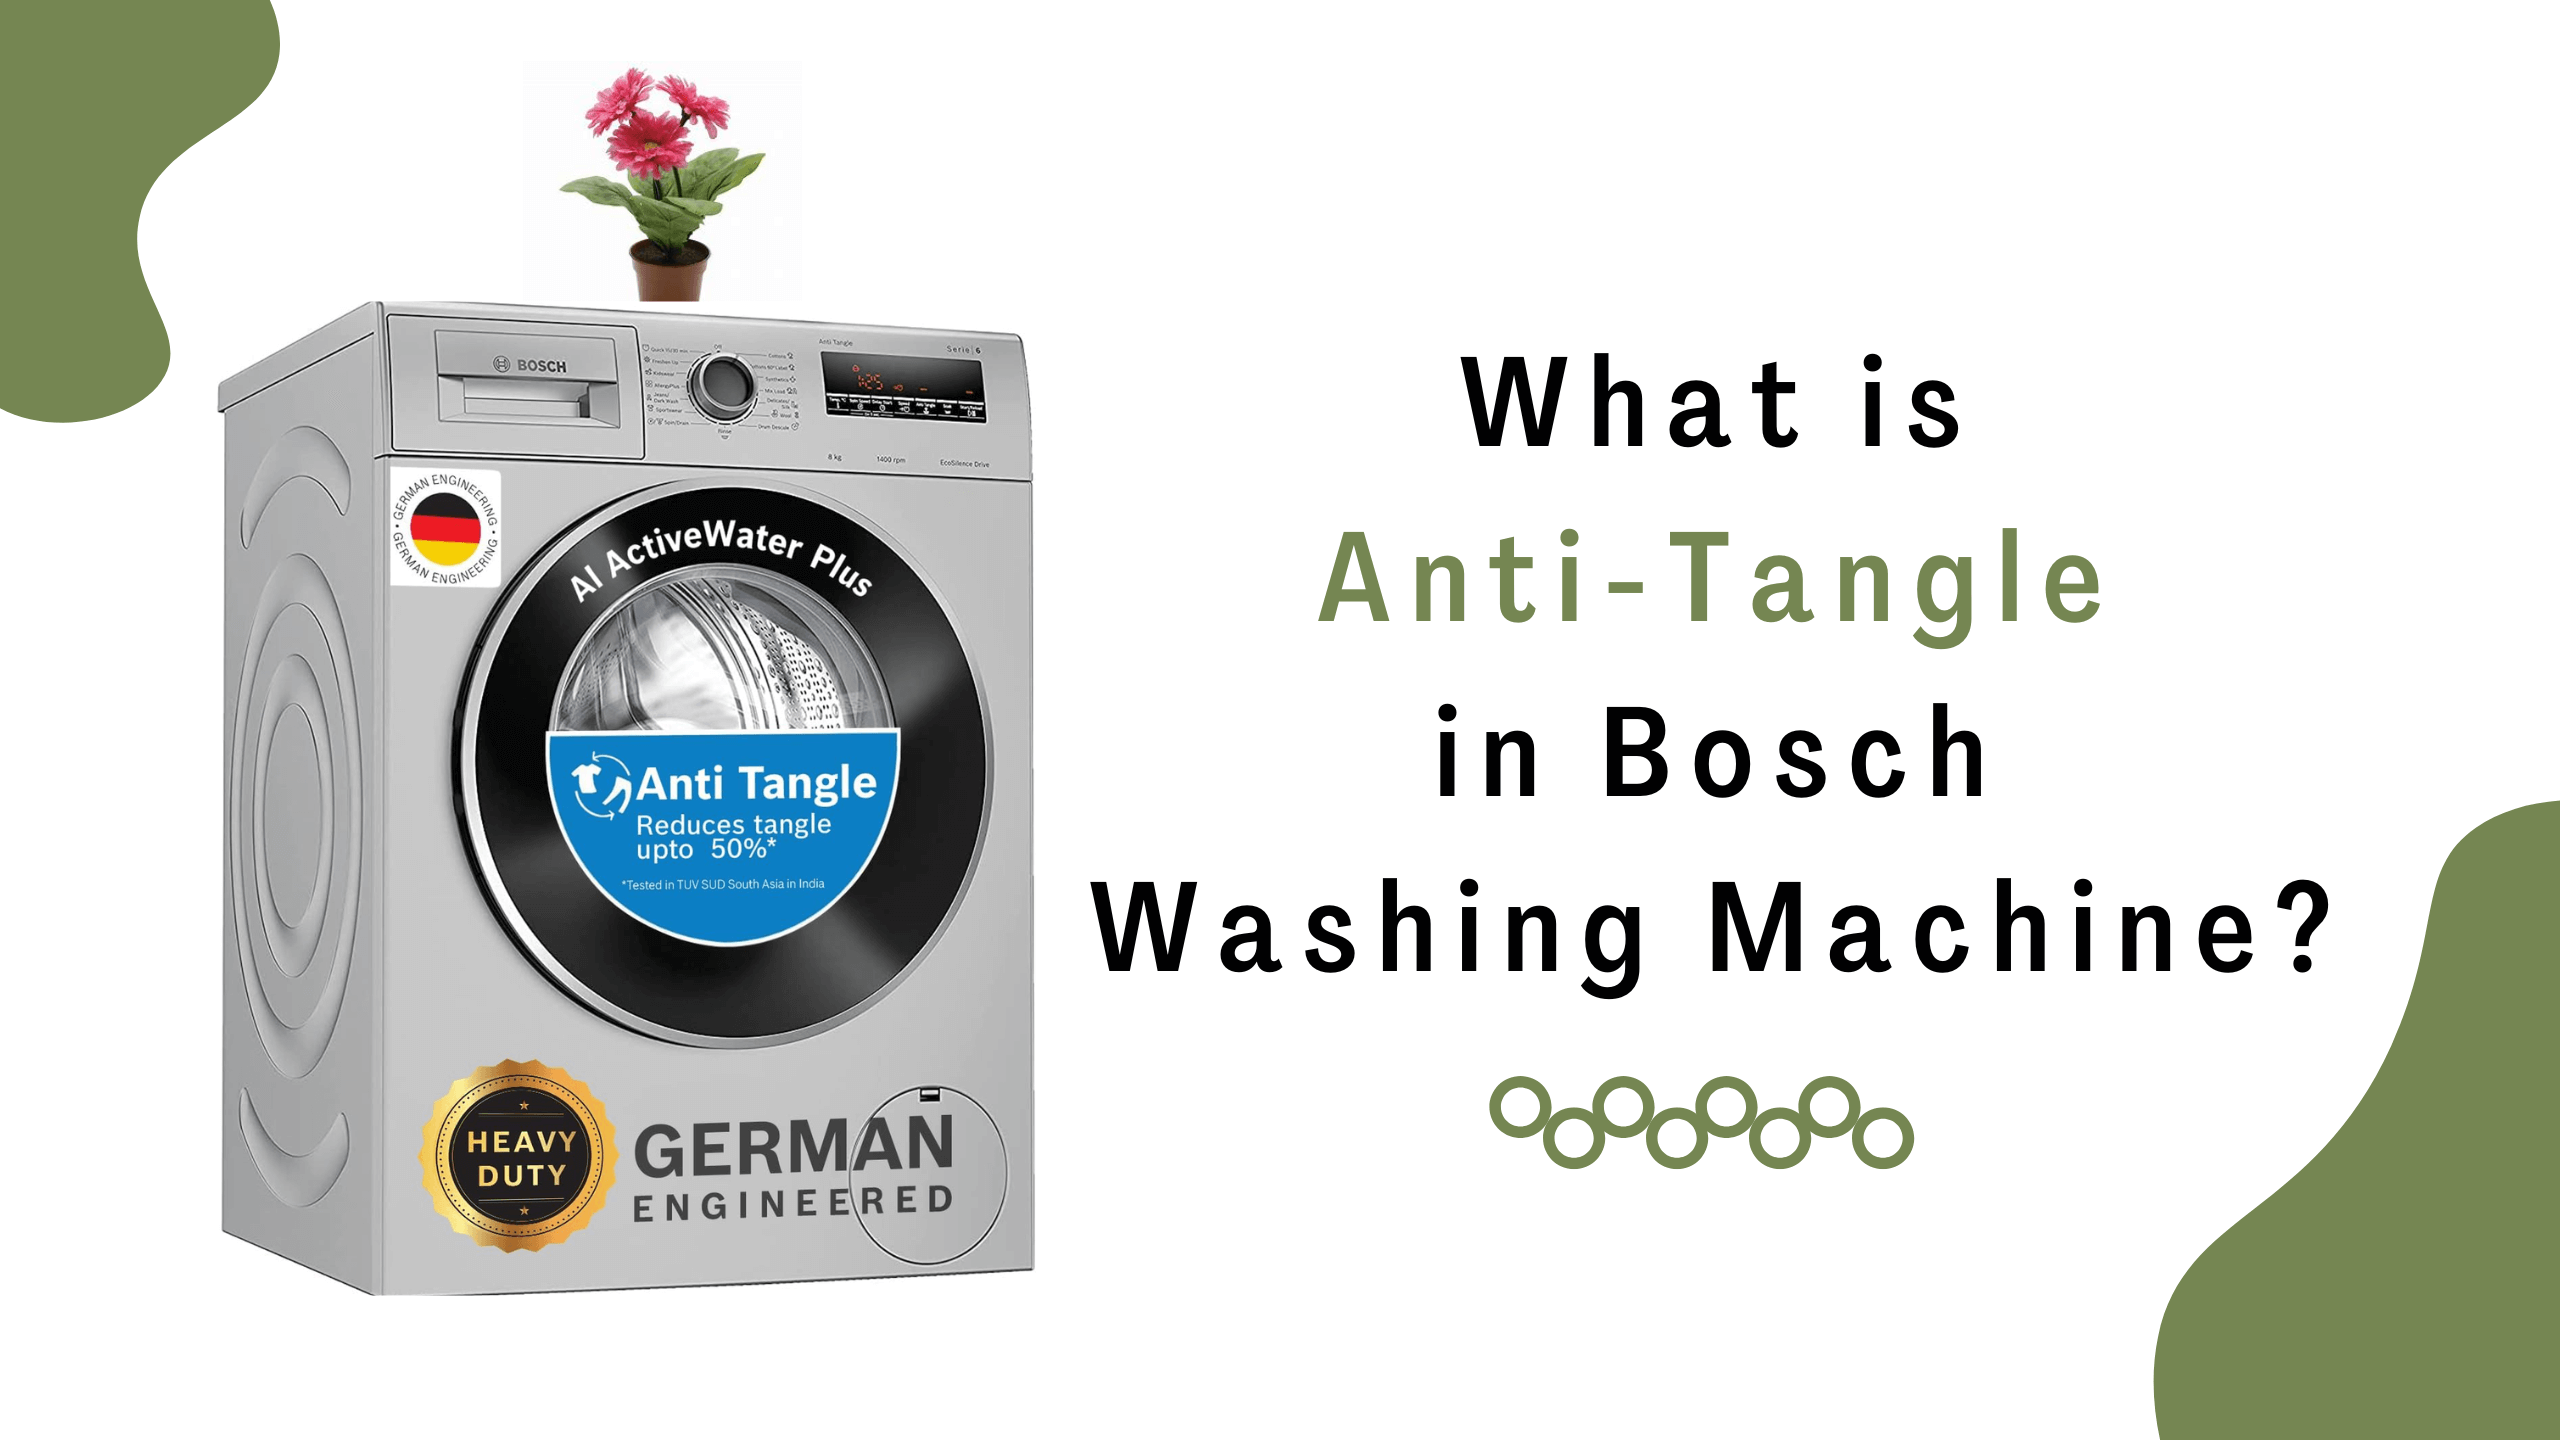 What is Anti-Tangle in Bosch Washing Machine?